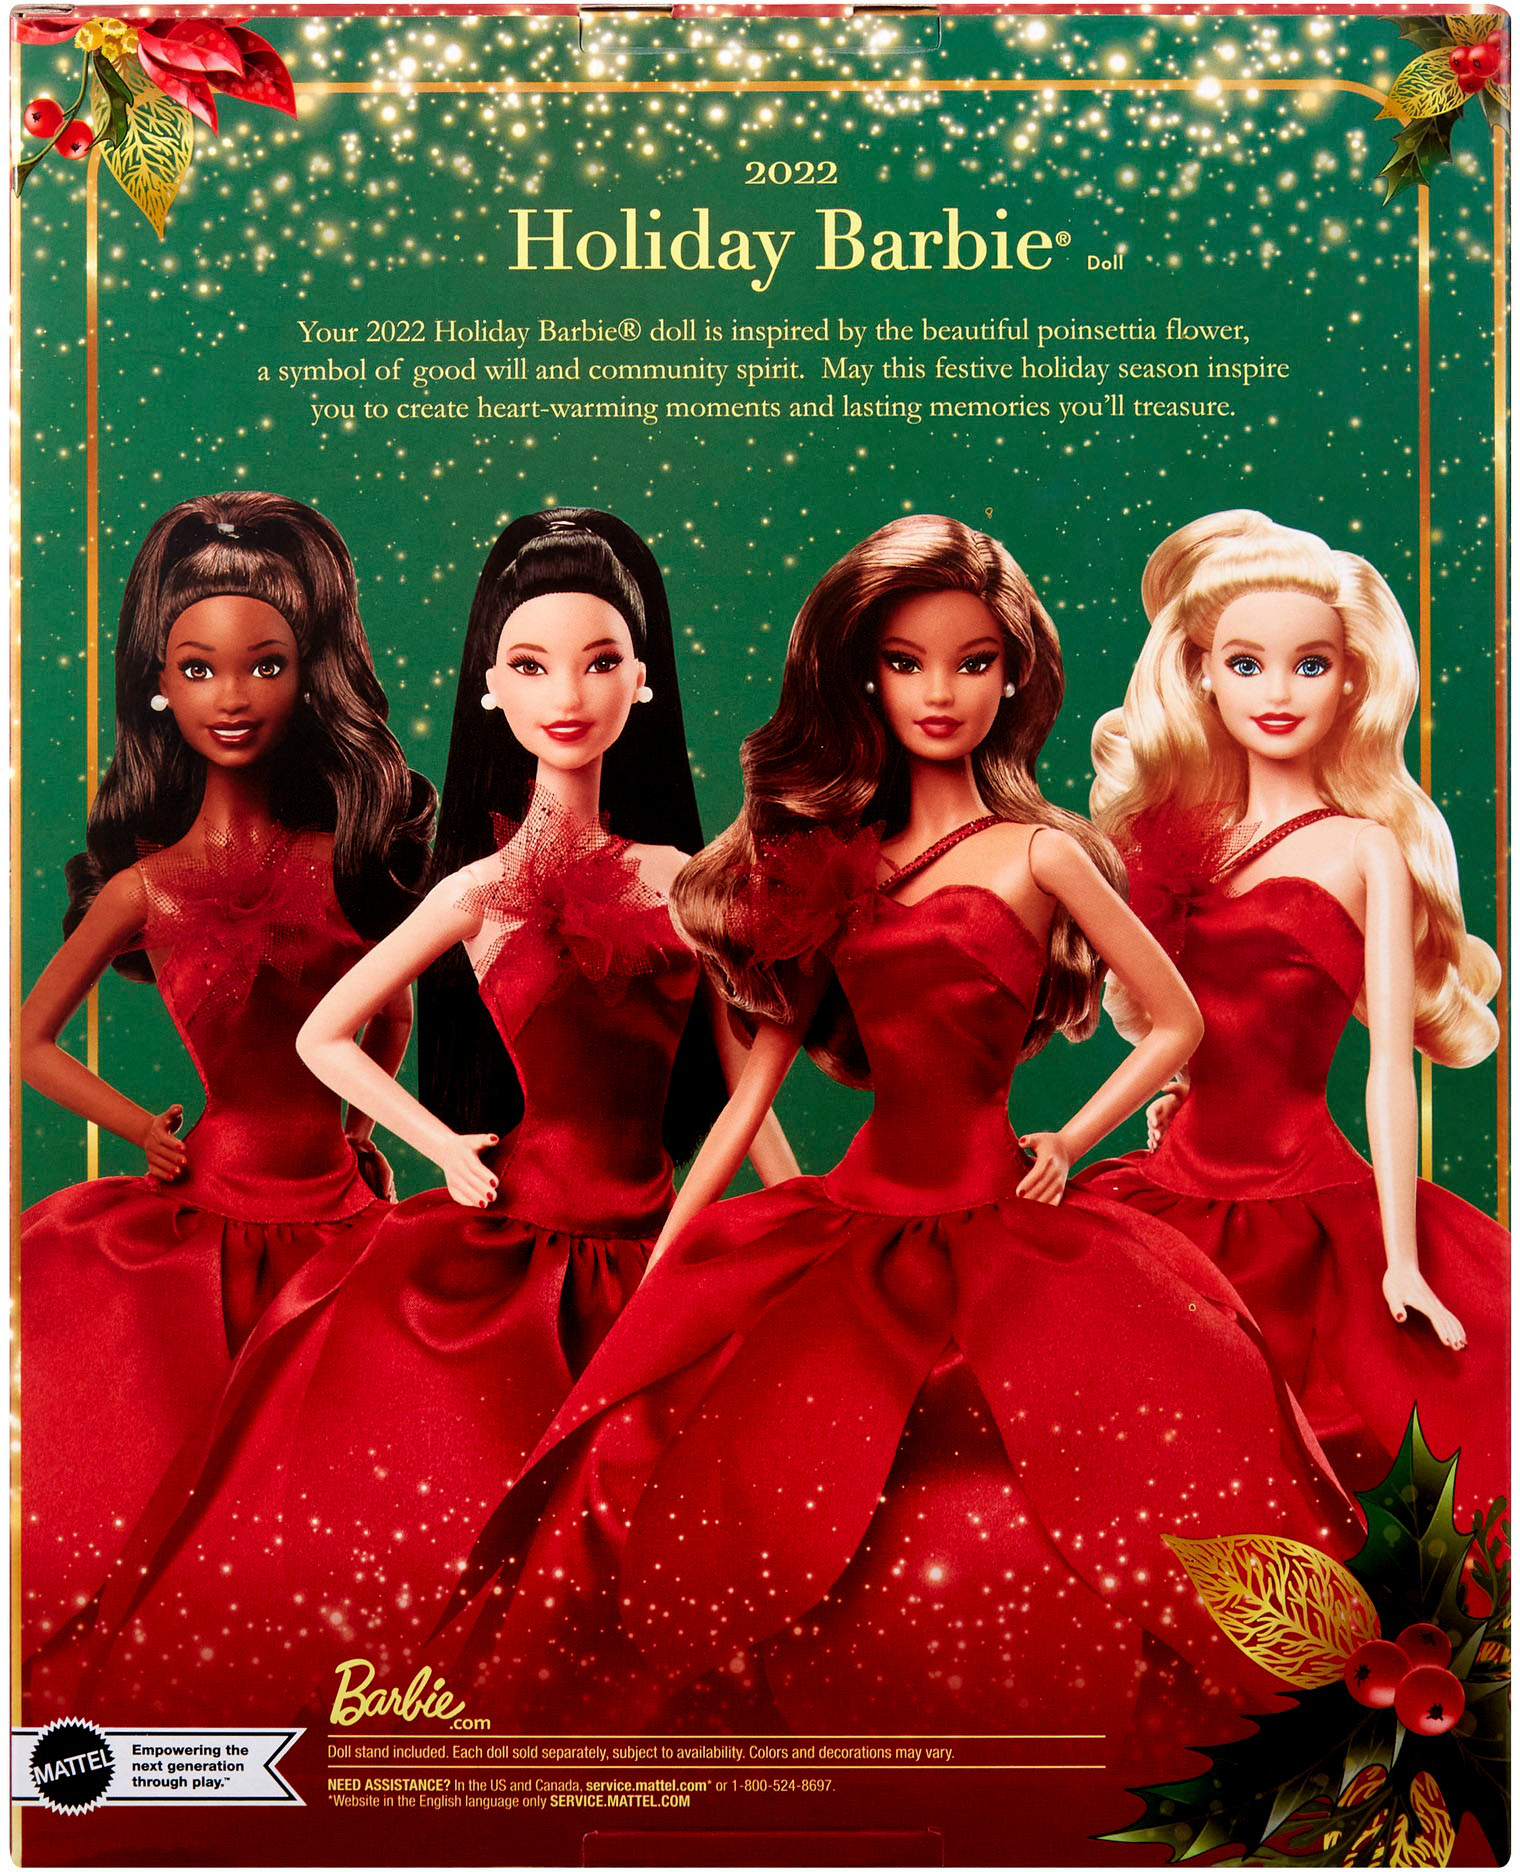 Barbie Signature 2022 Holiday Barbie Doll (Red Hair), 6 Years and Up 